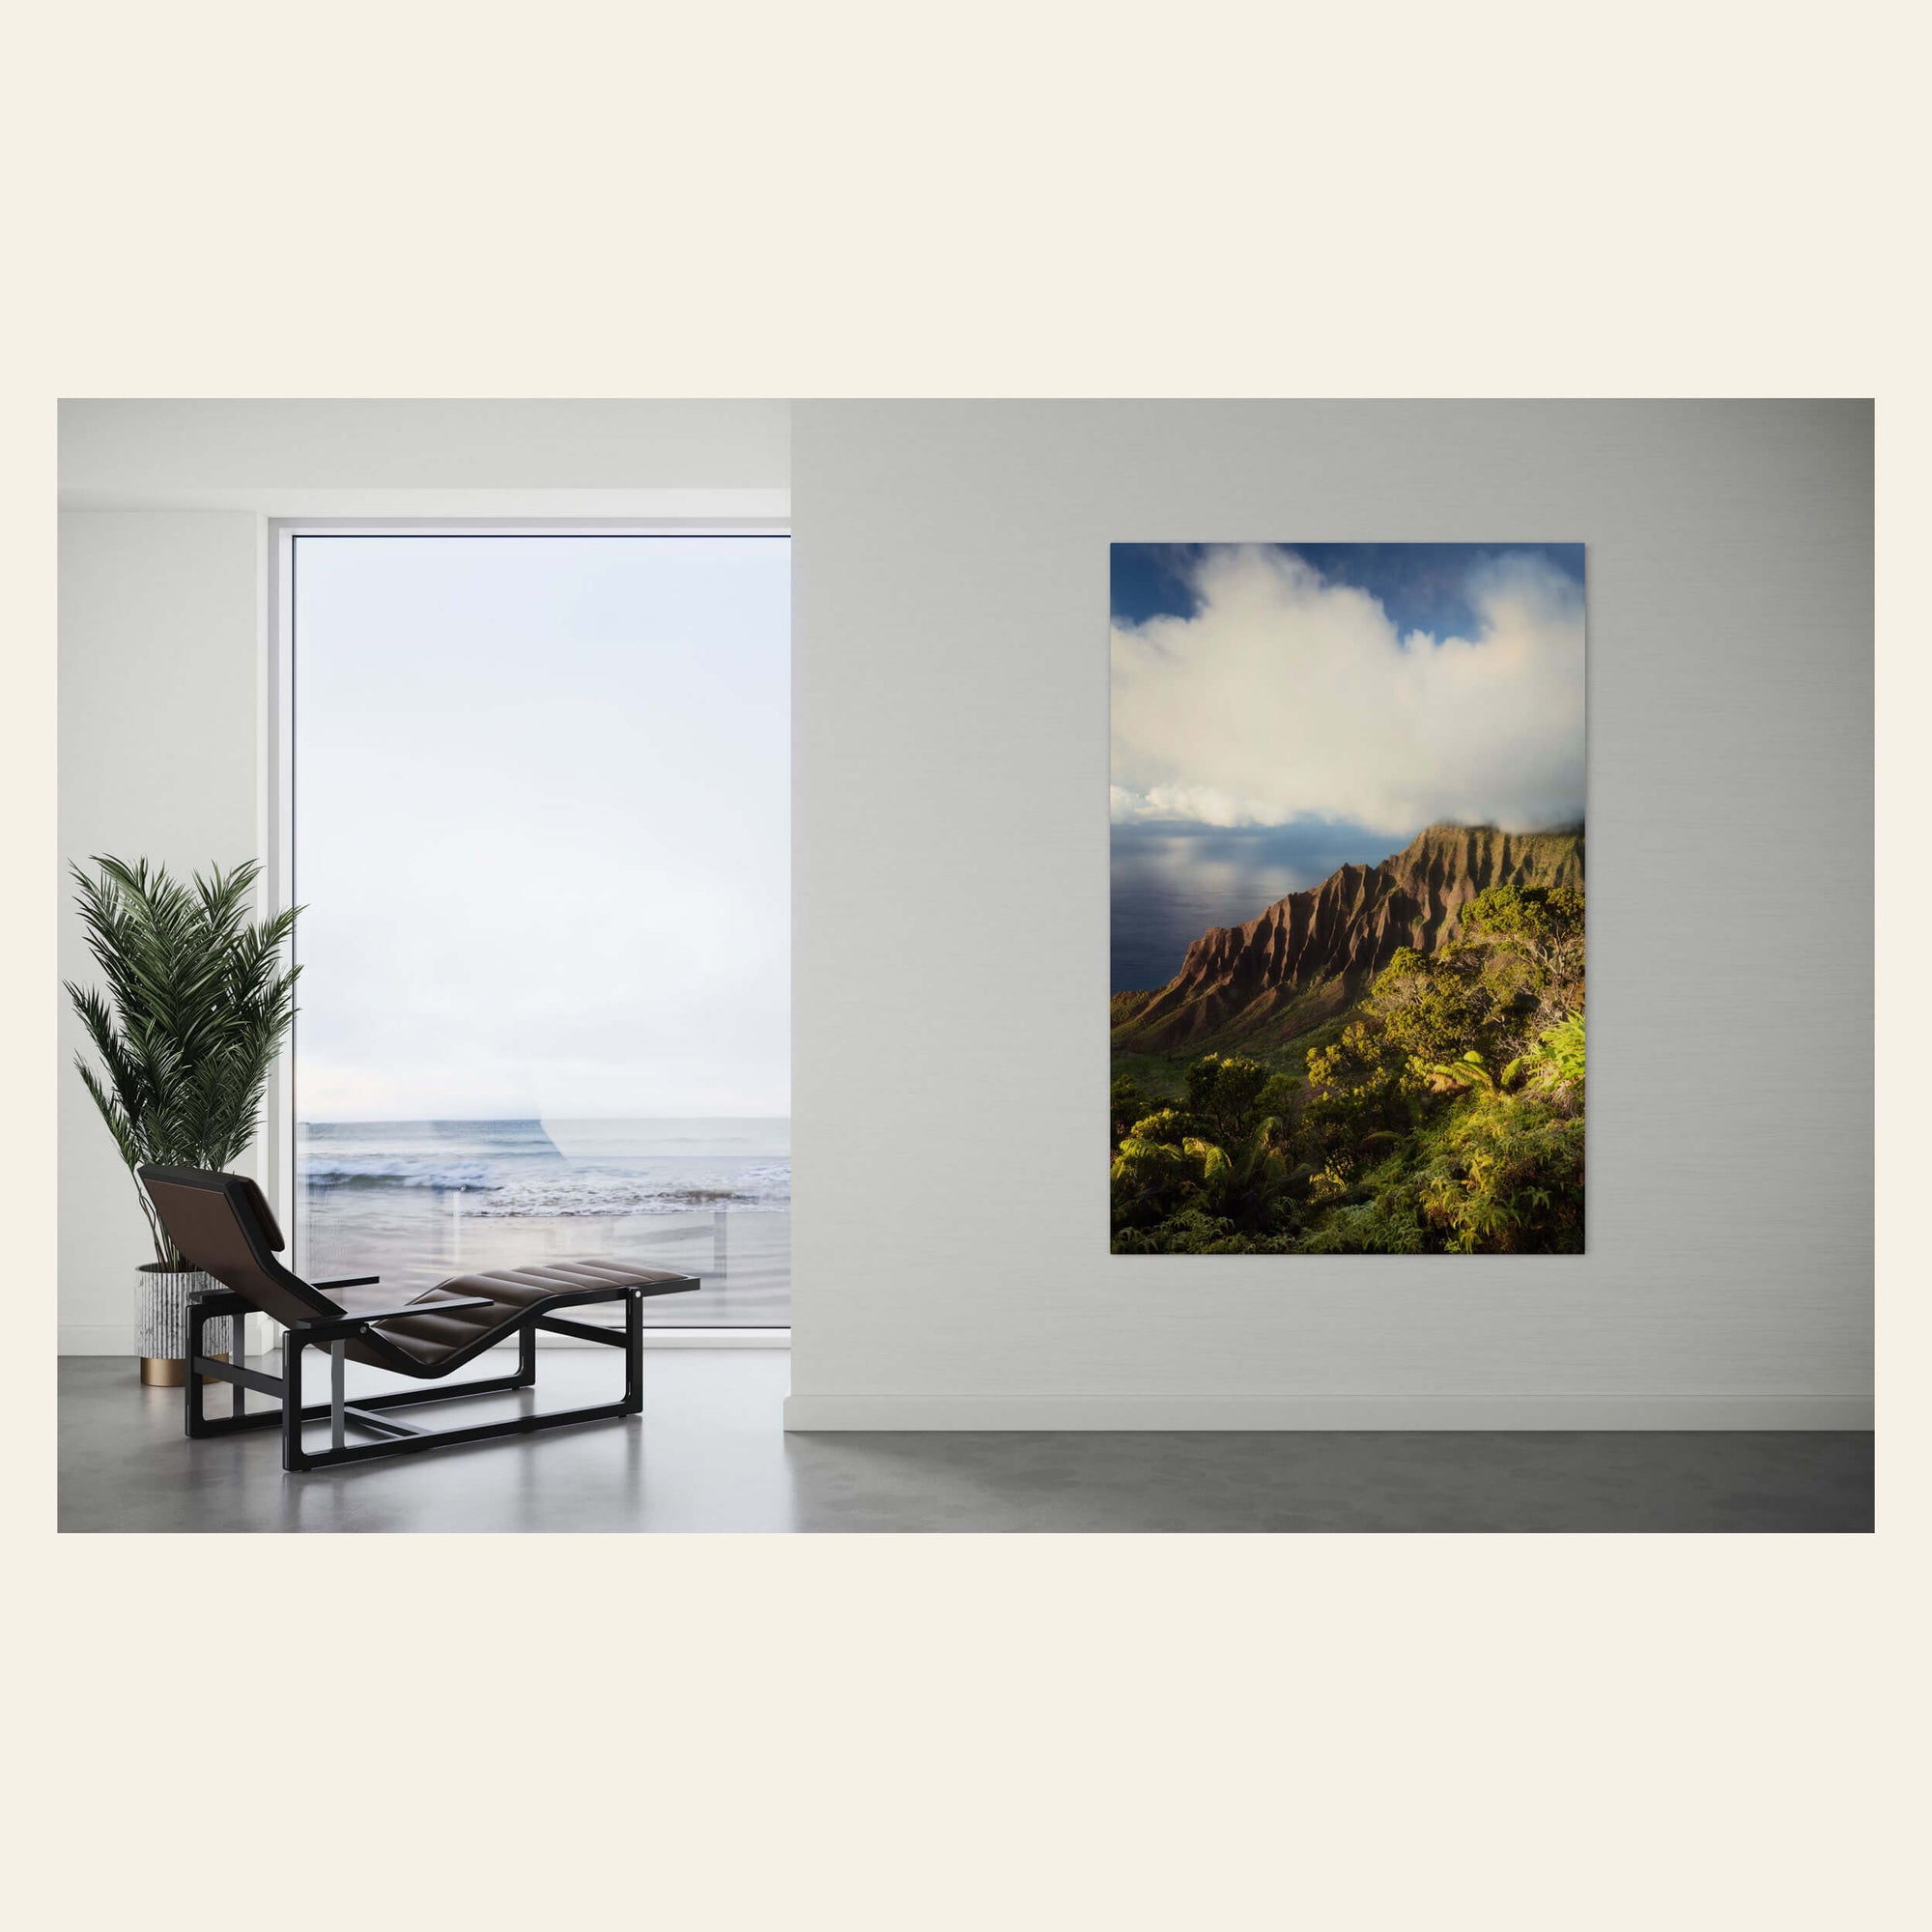 A Napali Coast picture from Kauai hangs in a living room.